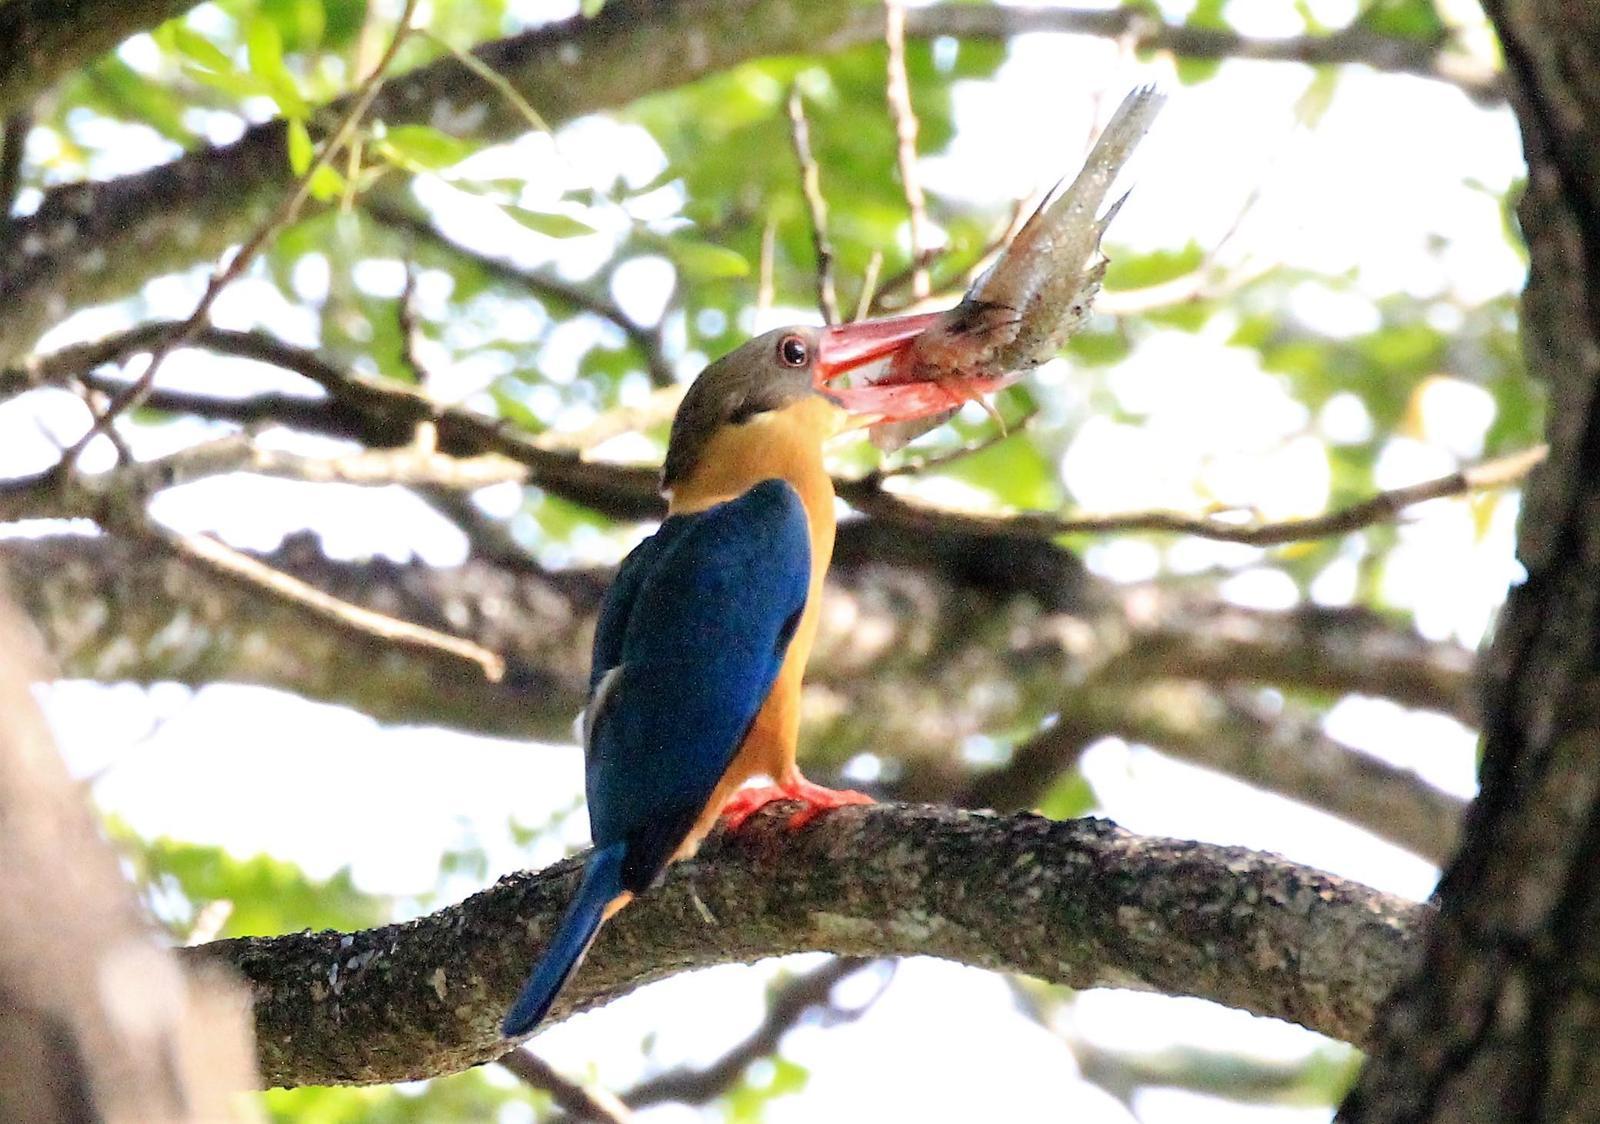 Stork-billed Kingfisher Photo by Steven Cheong